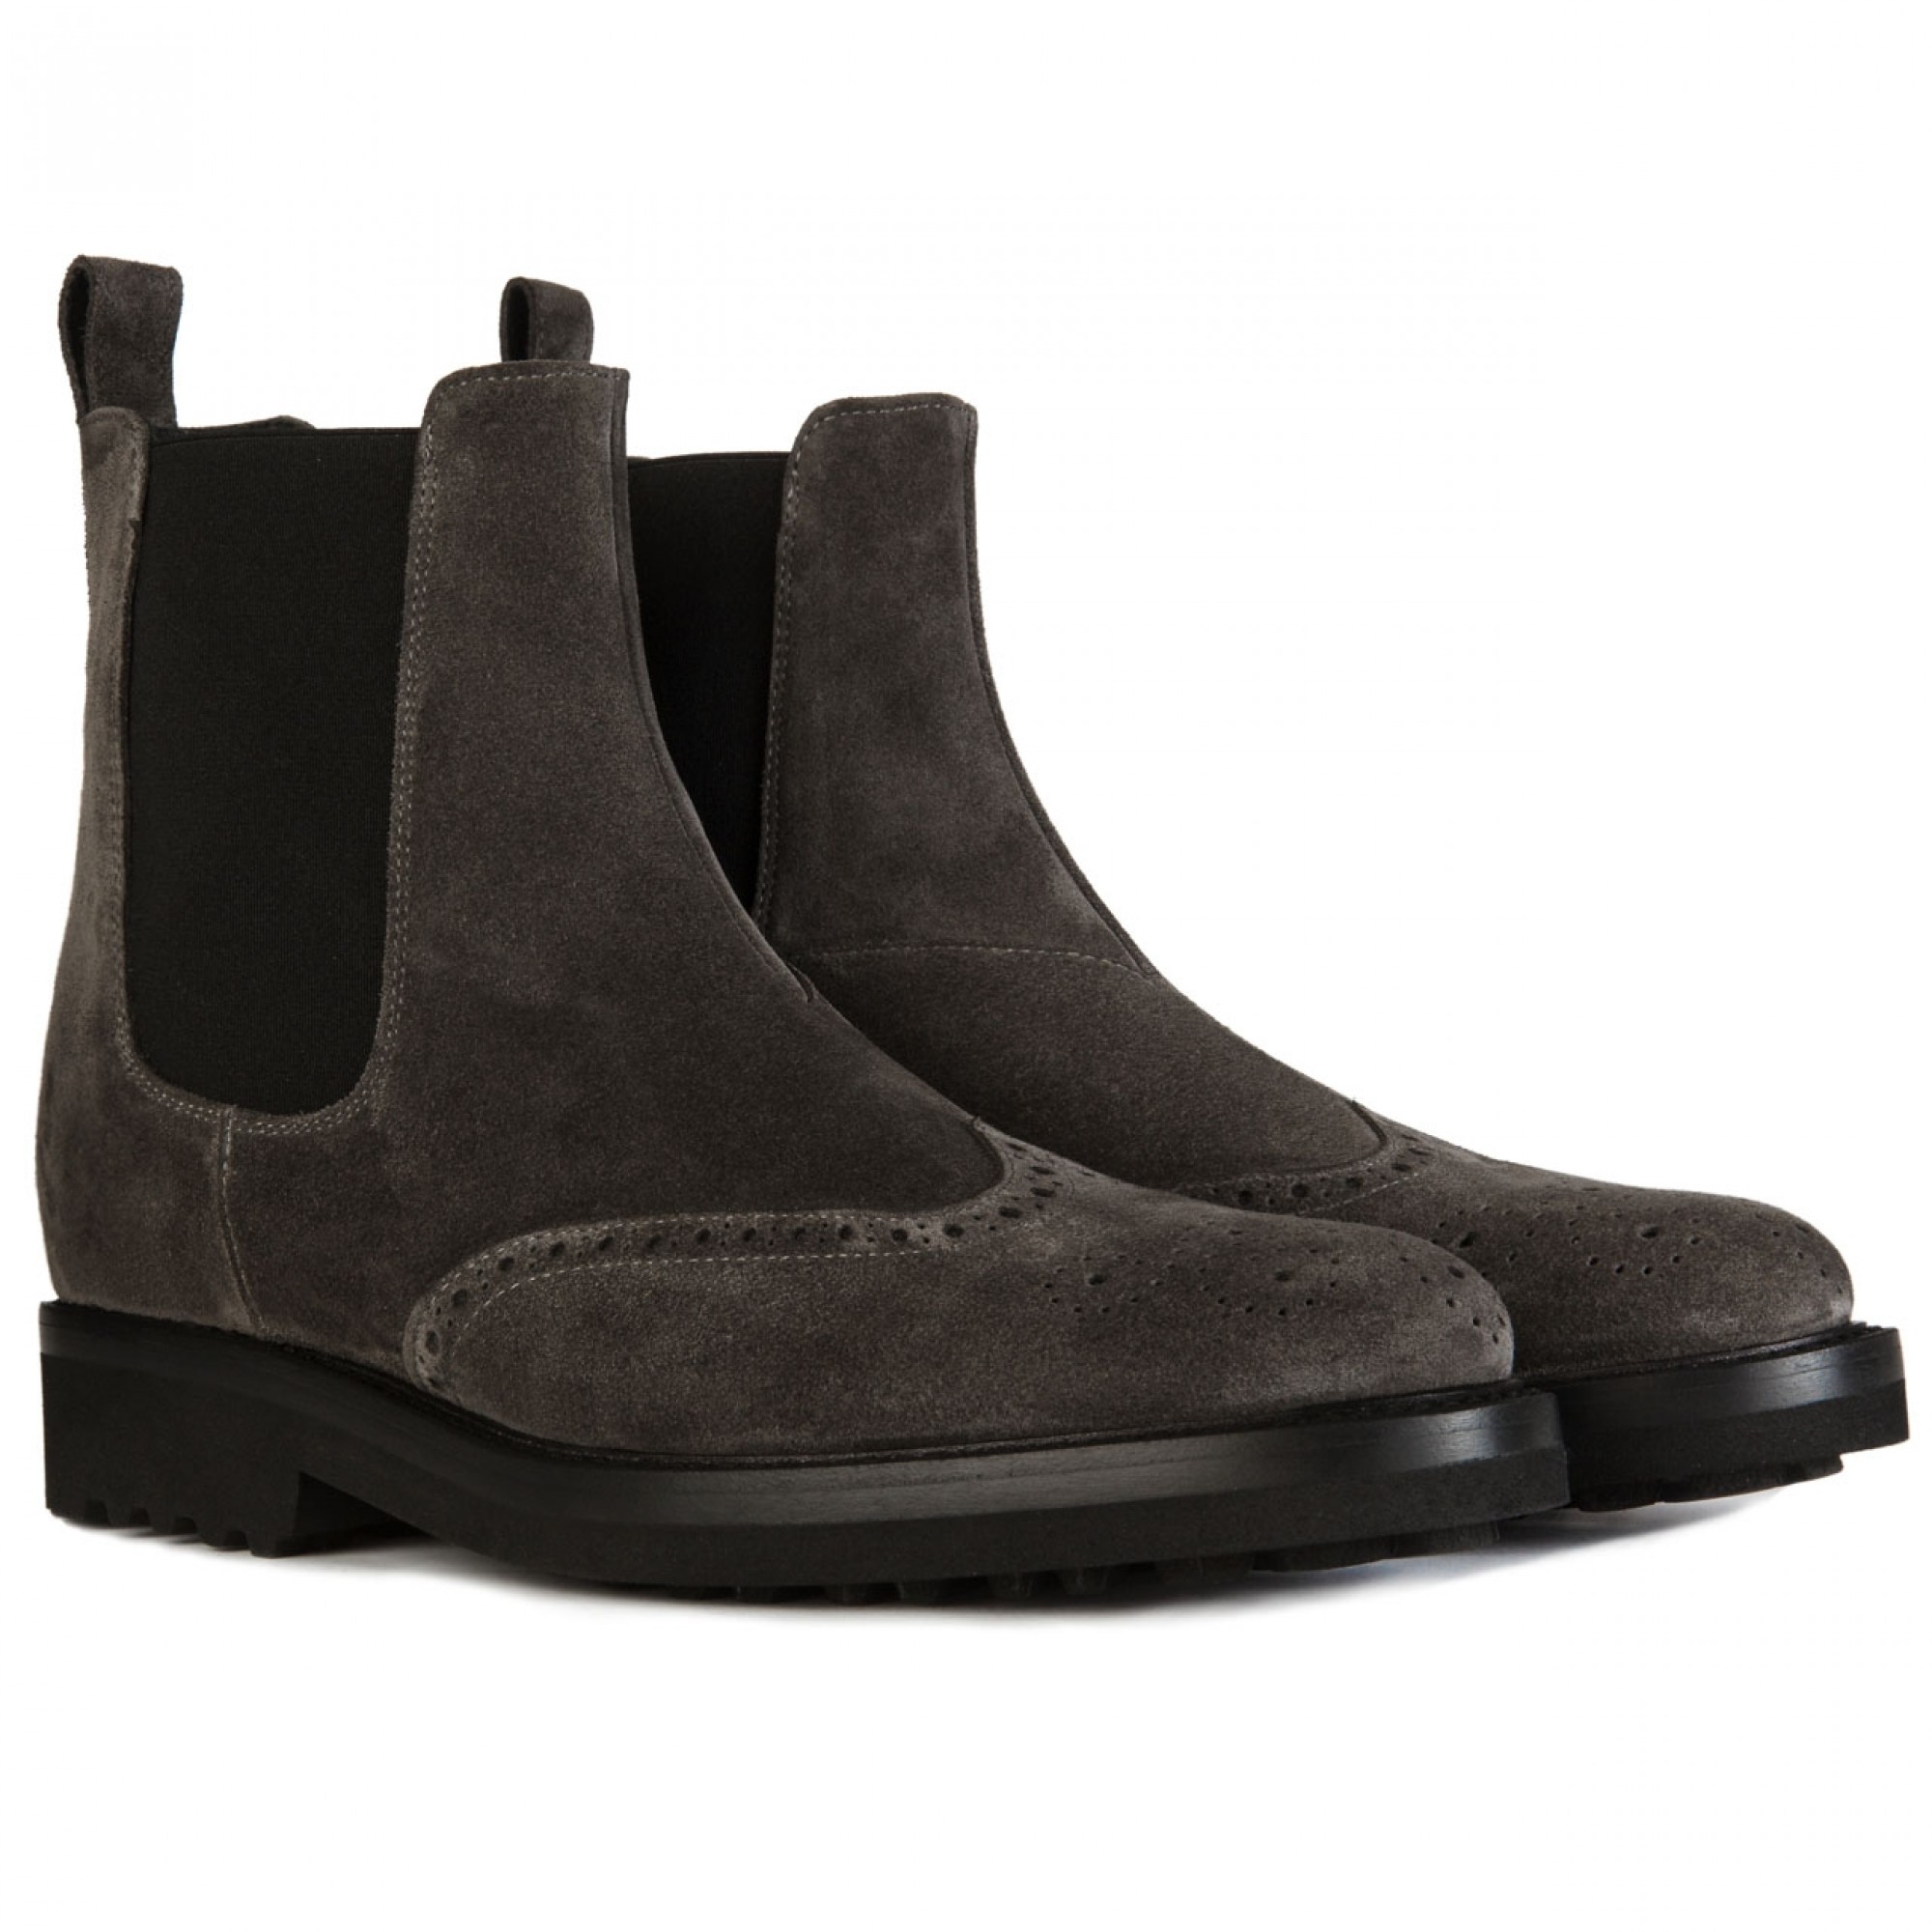 Aquila - Elevator Boots in Suede Leather from 2.4 to 4 inches